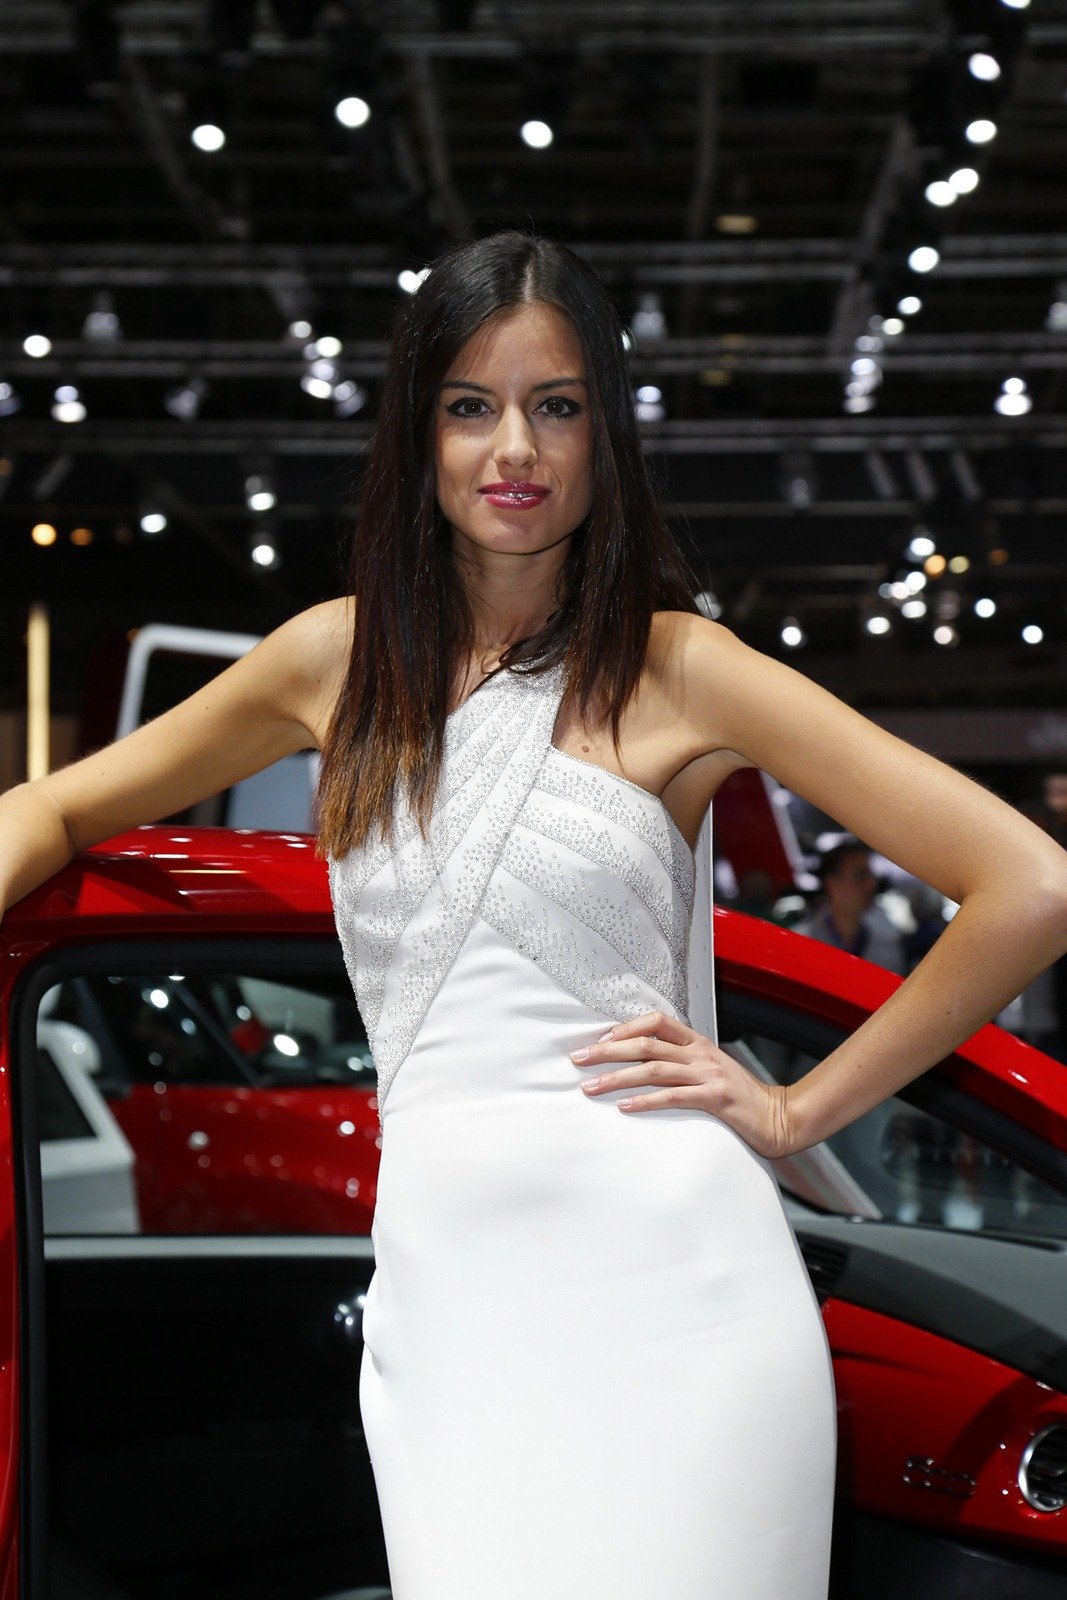 Girls of the 2012 Moscow Motor Show - AutoTribute